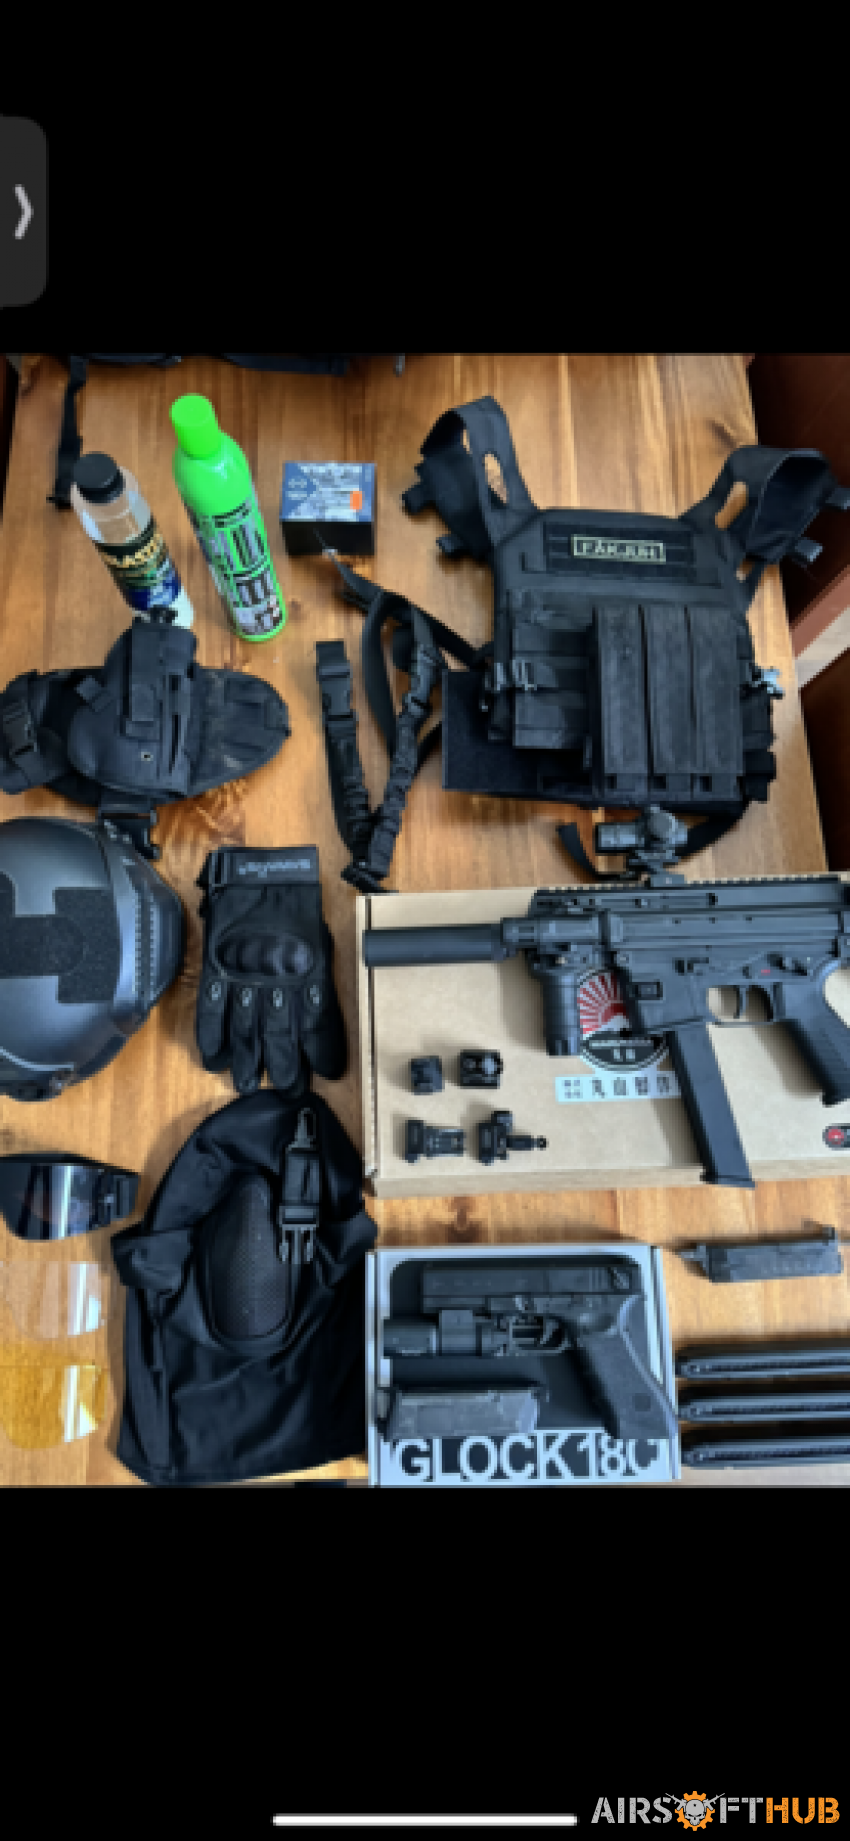 Gbb airsoft bundle - Used airsoft equipment